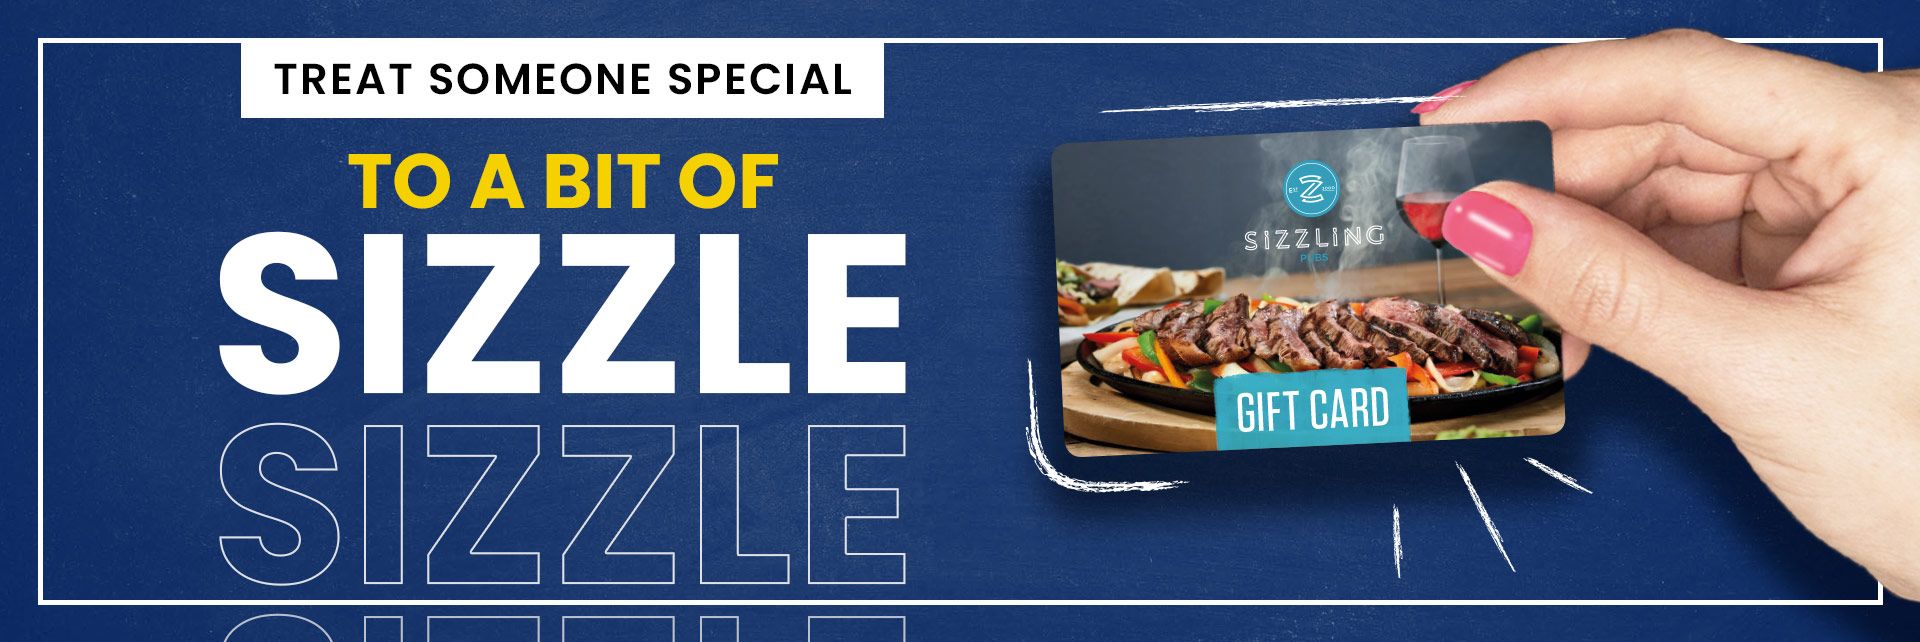 Sizzling Pubs Gift Card at The Friendly Forester in Bridlington